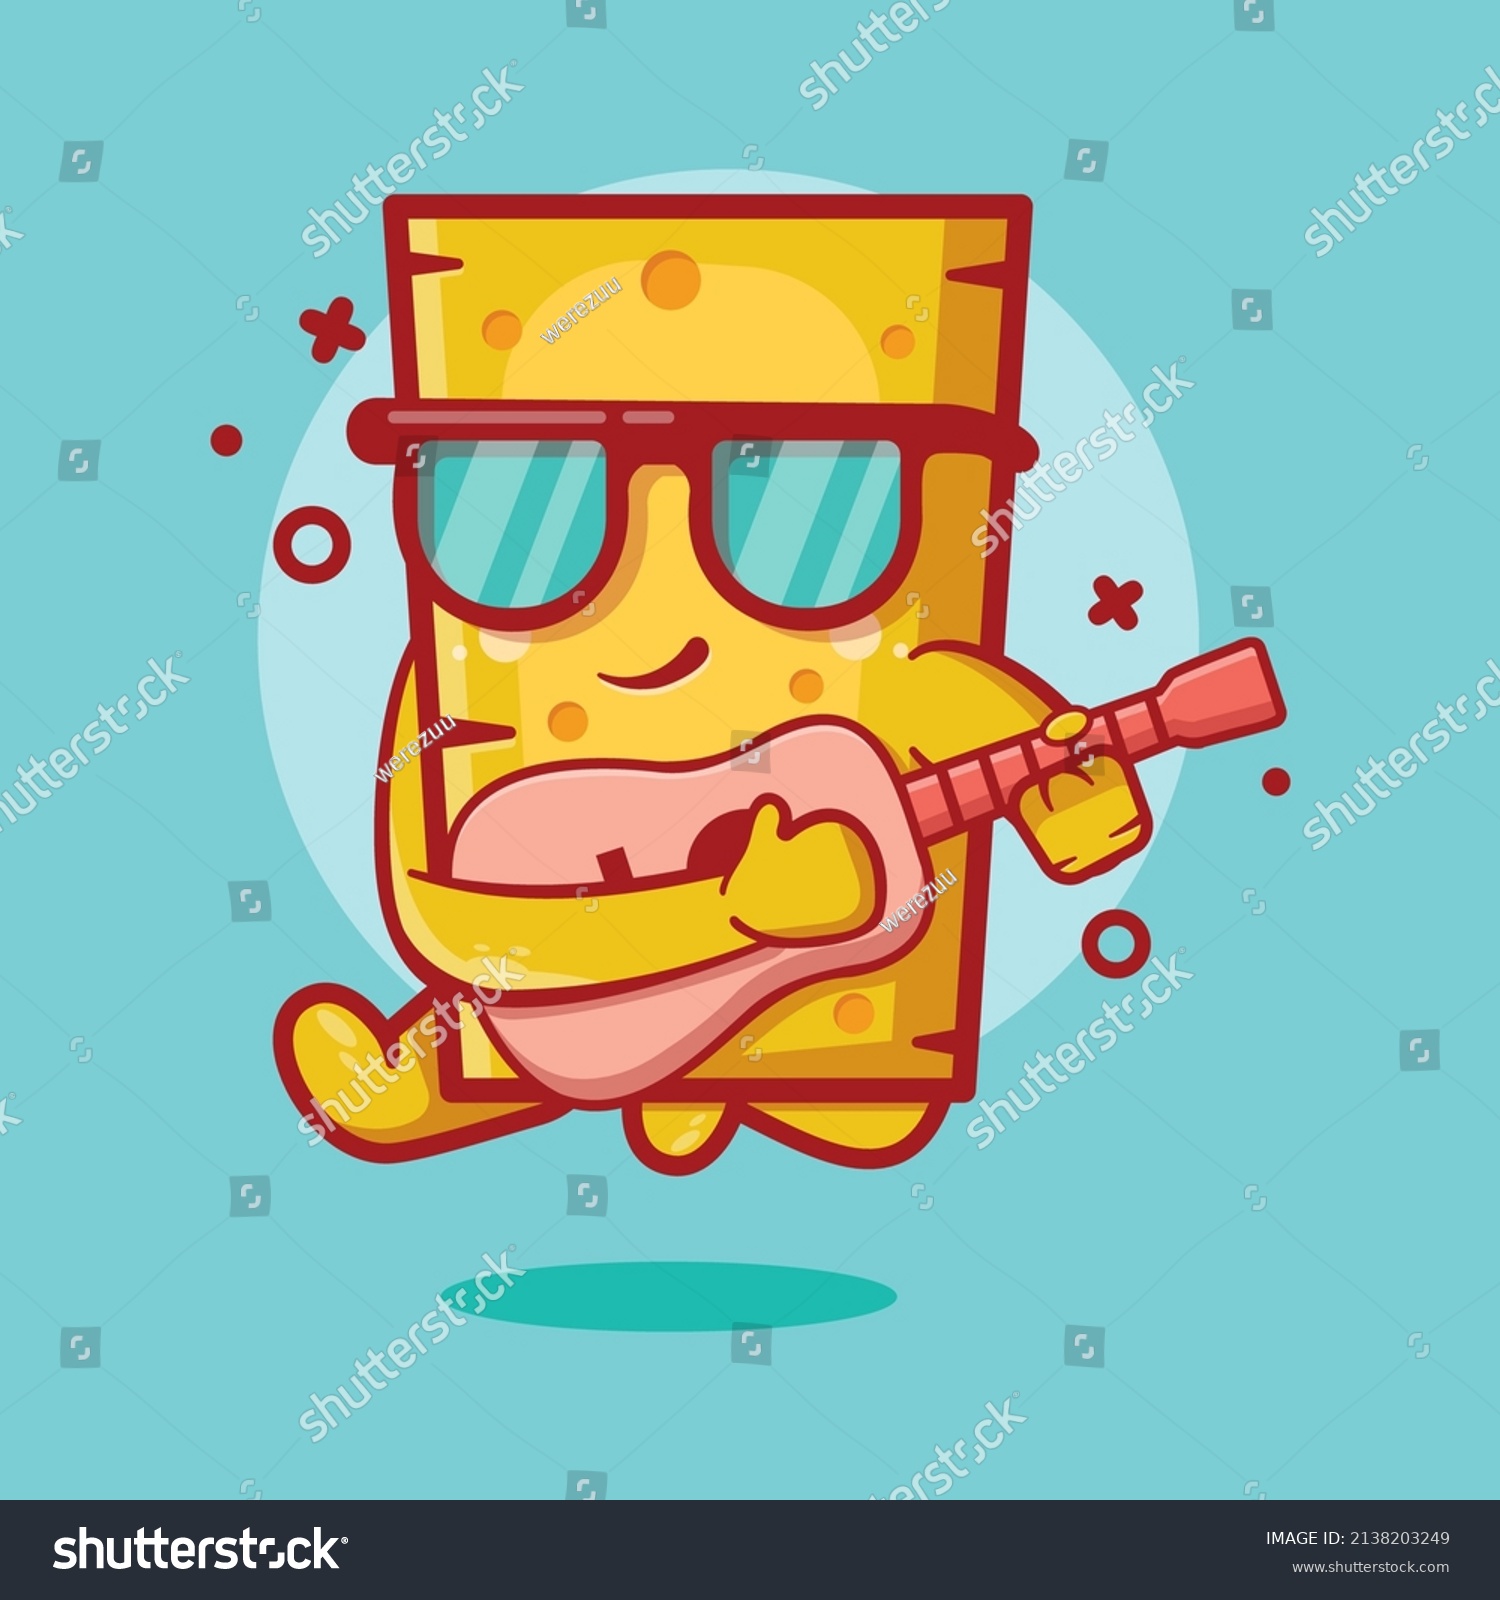 SVG of cool cheese character mascot playing guitar isolated cartoon in flat style design  svg